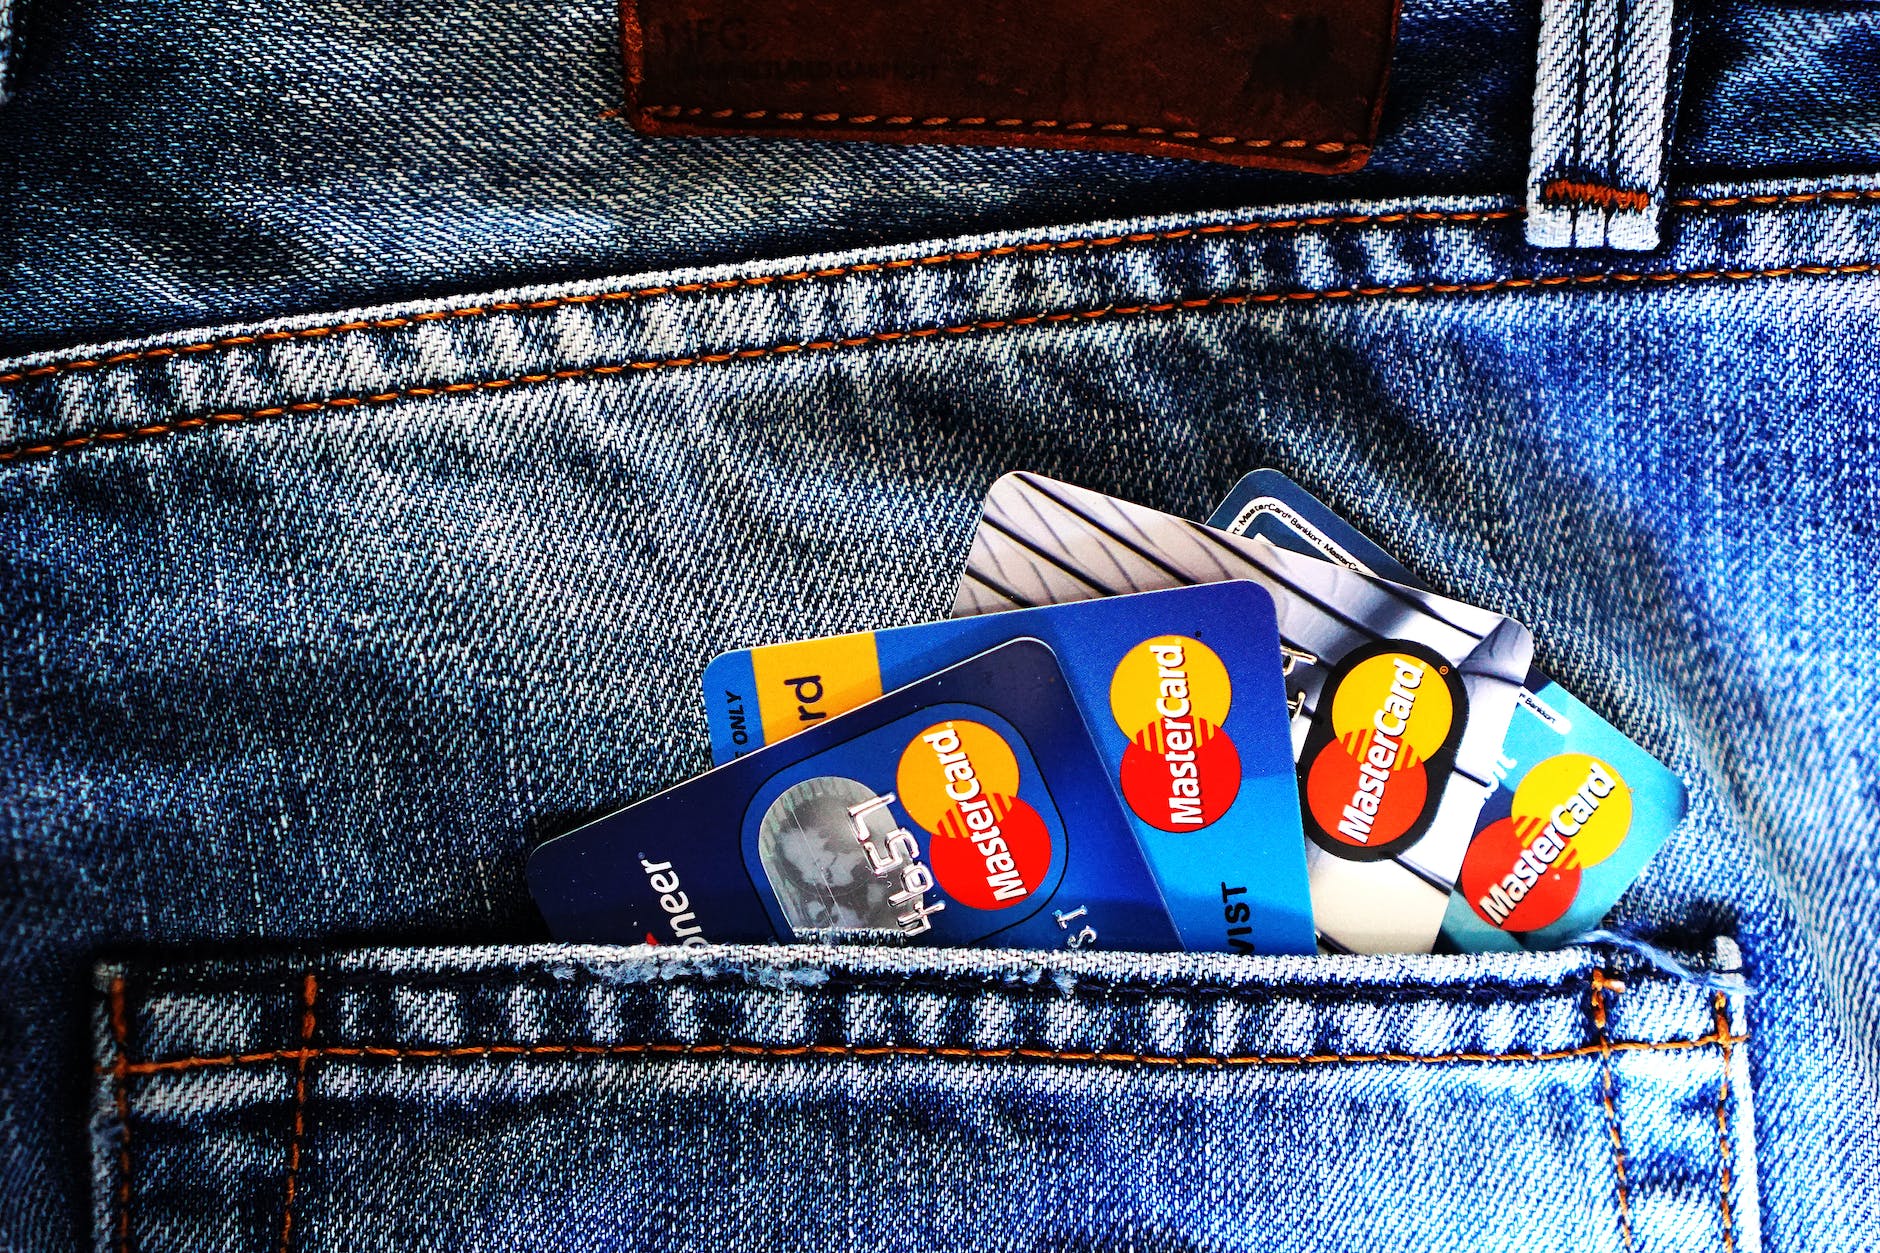 Here are some tips to help you use your credit card wisely: